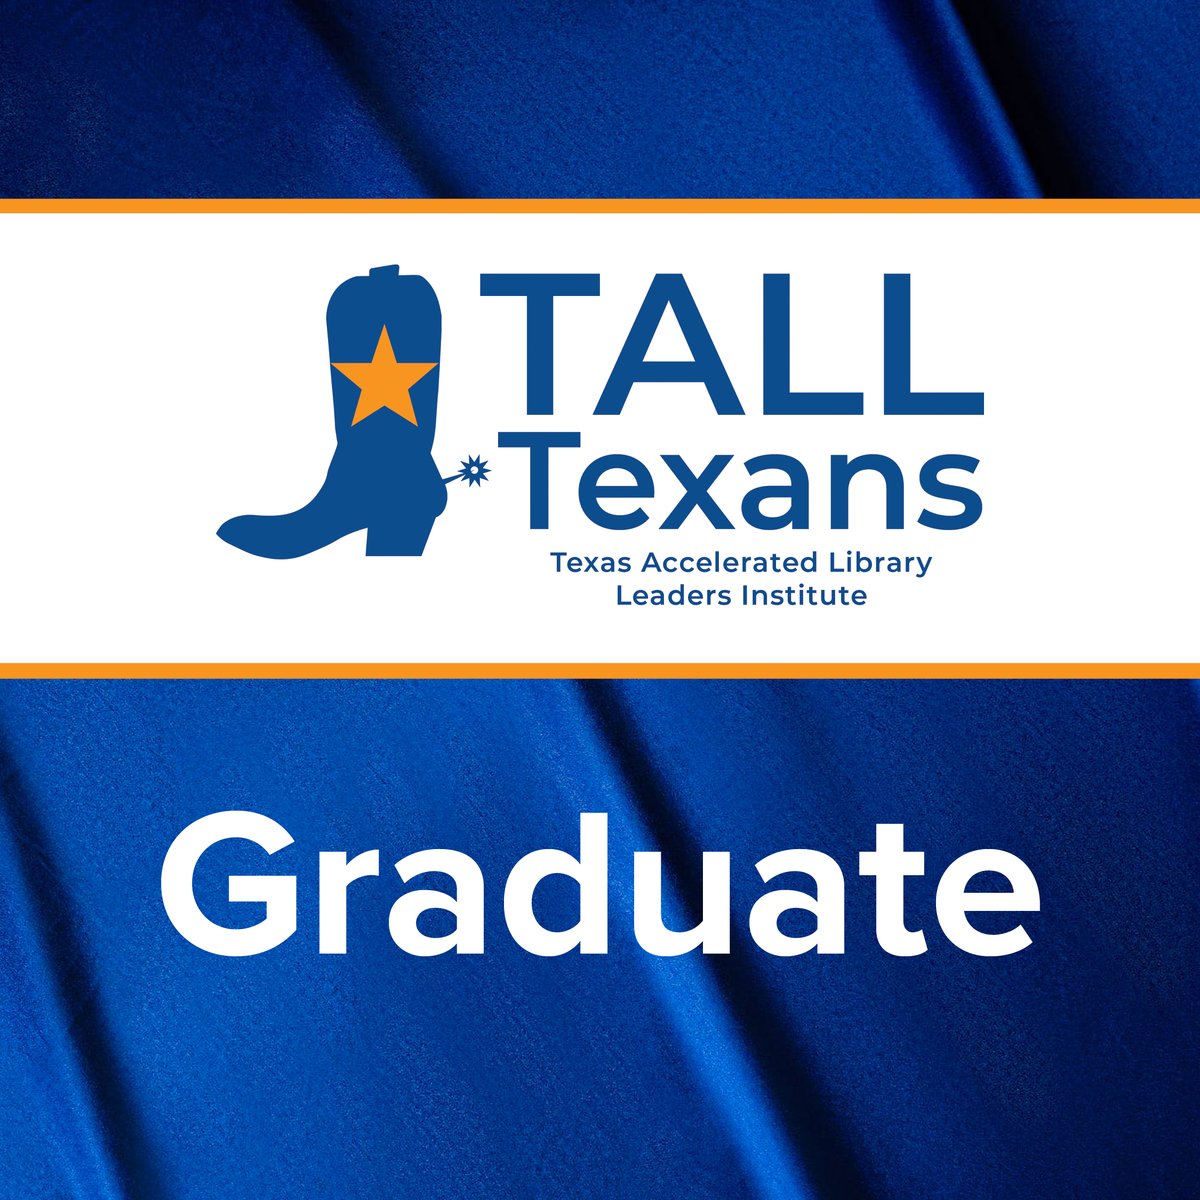 This #TallTexans22 grad will attend the TALL Texans Social, @LatinoCaucusTLA Austin Taco Project, and the @TXLA Leadership Symposium during #TLA23. Registration is open, y'all! Sign up today! #CPC23